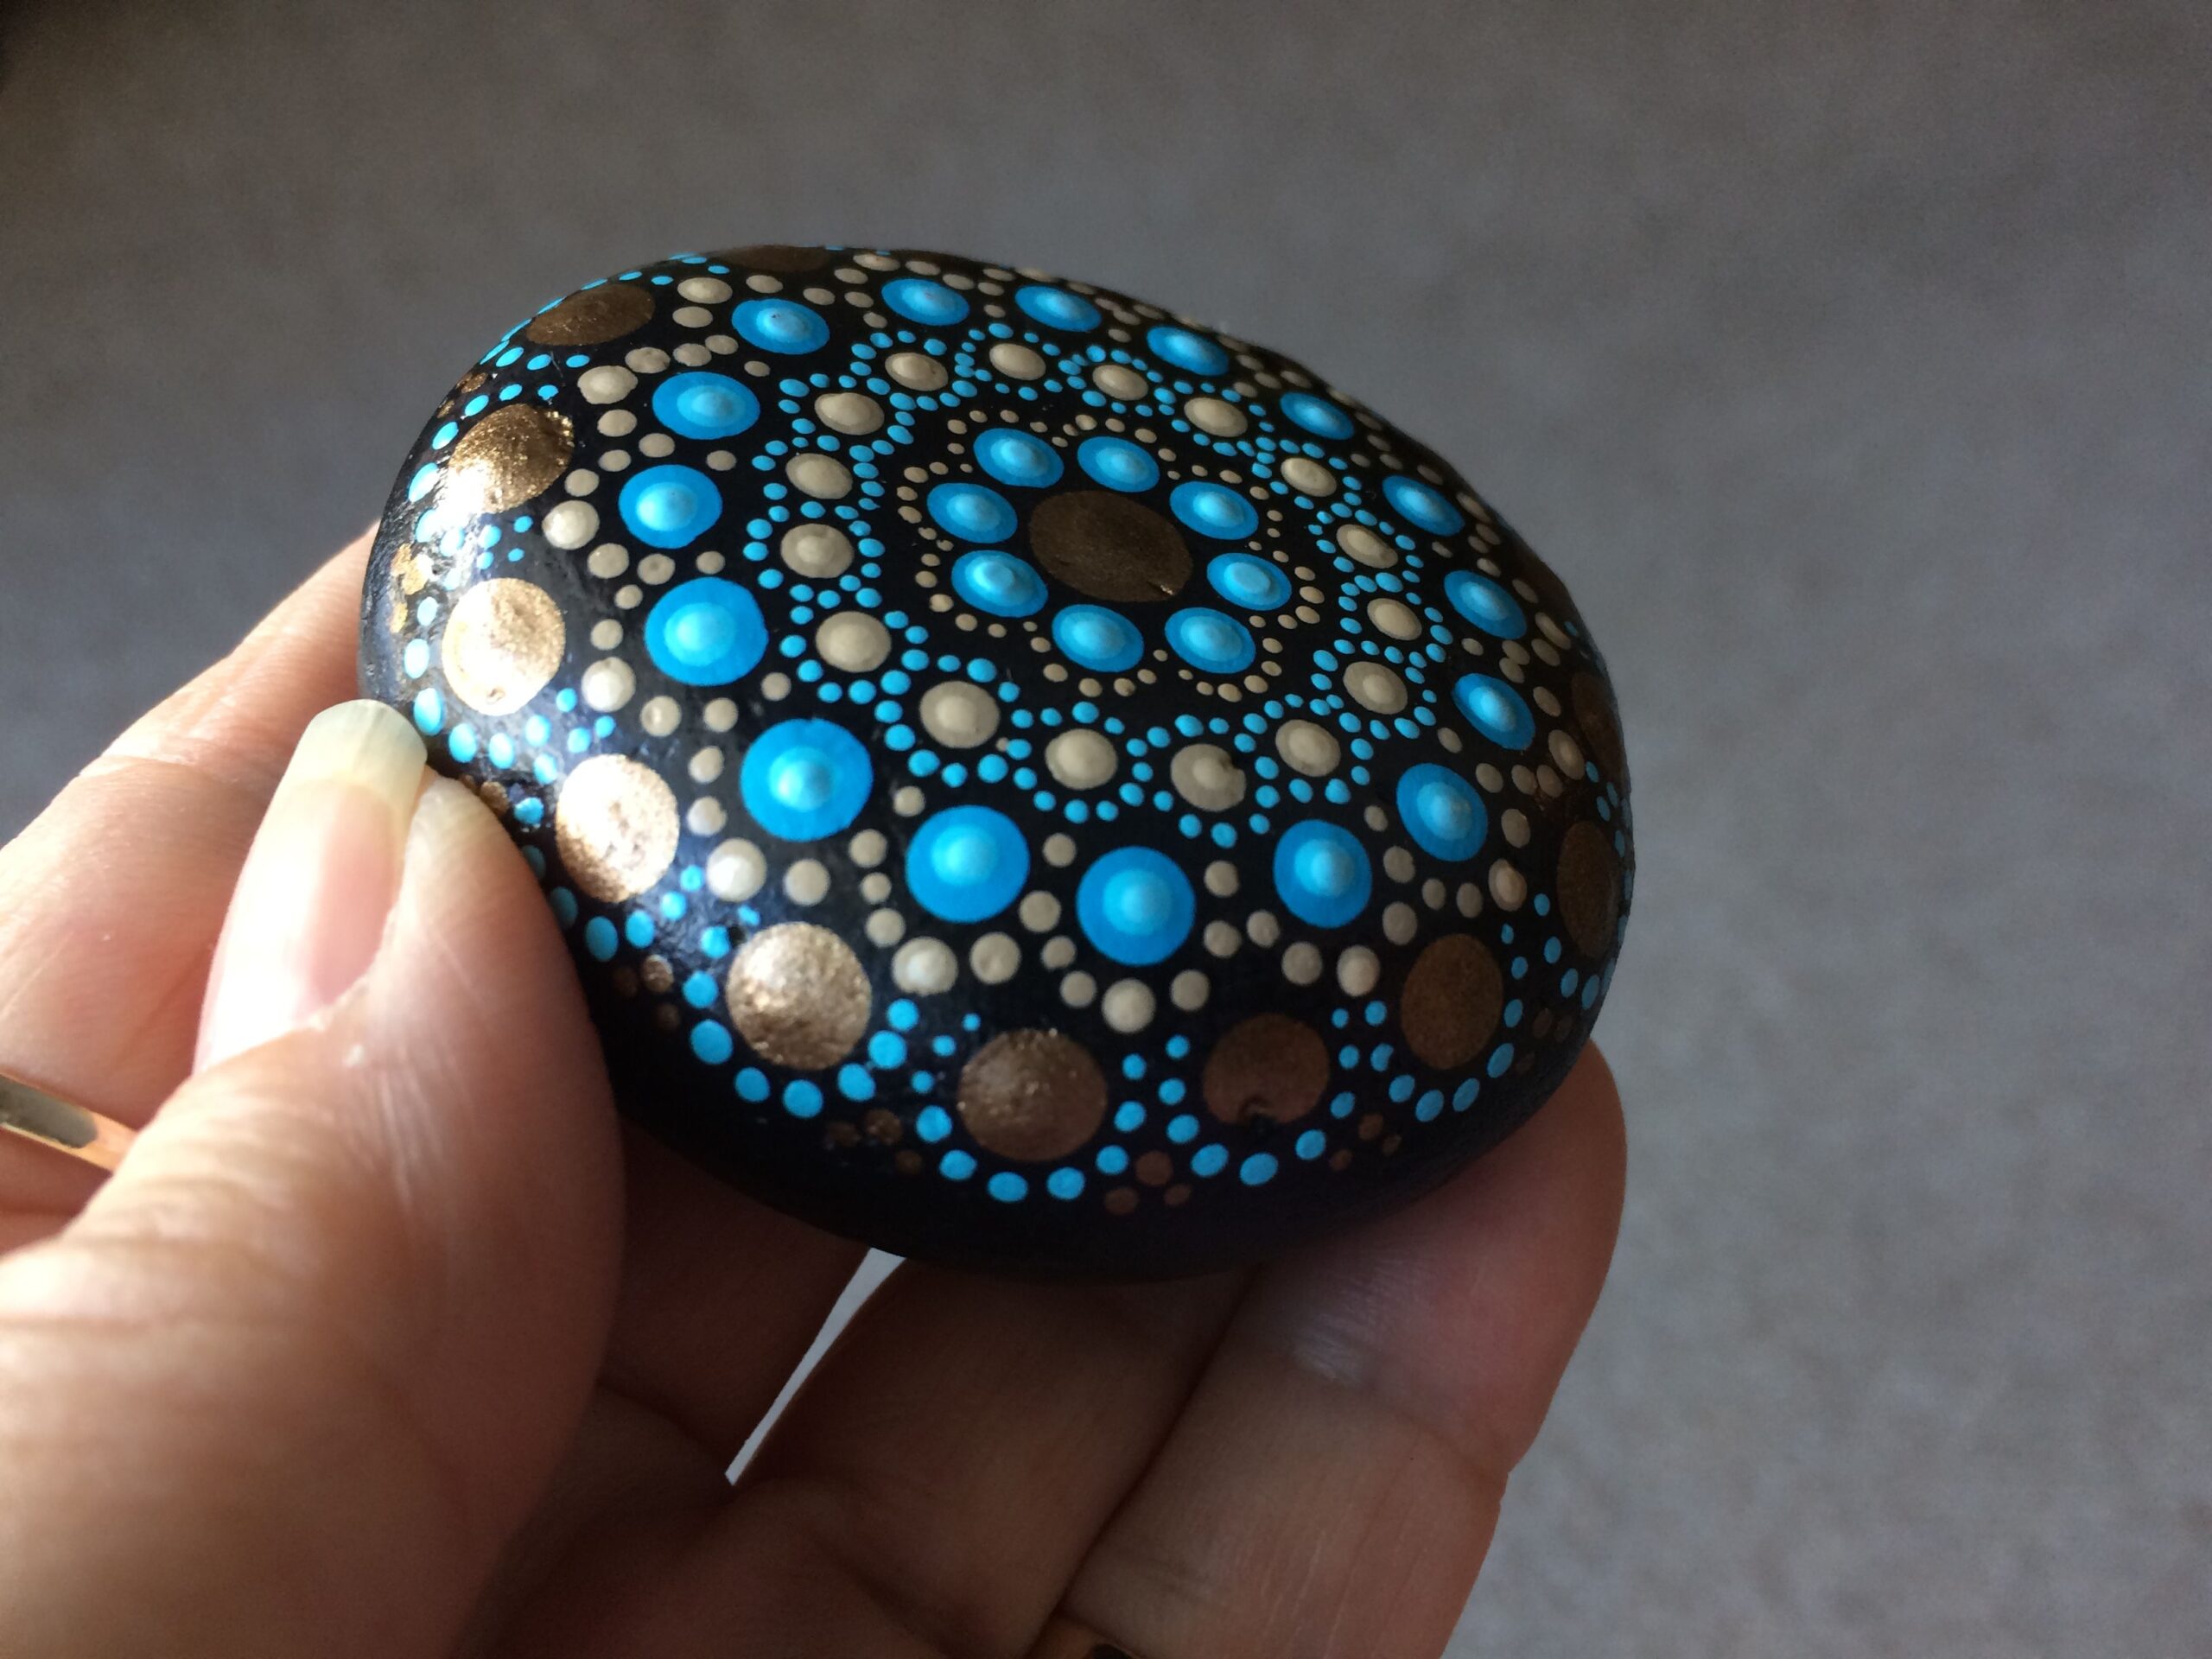 A hand holds a stone painted with a mandala pattern in blue and gold paint.